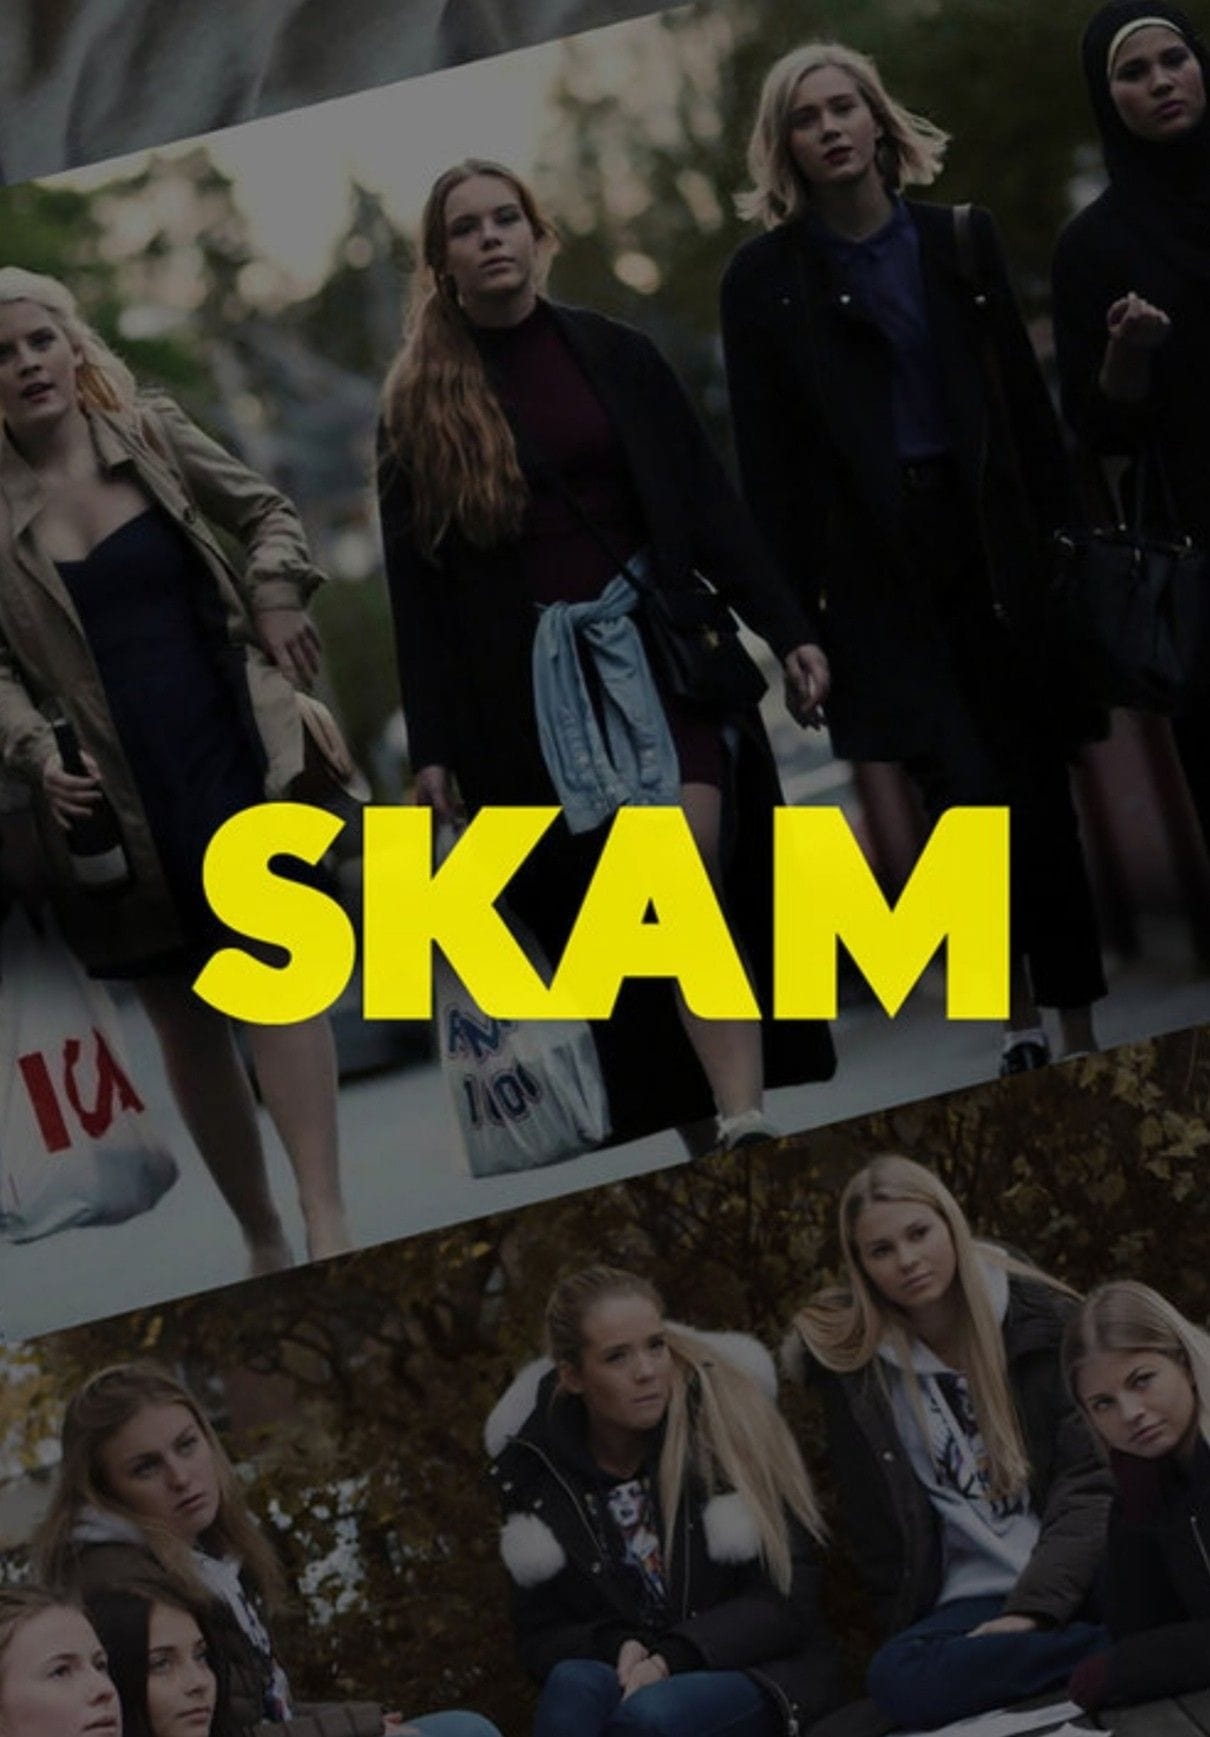 Skam TV Shows About Teenage Sexuality